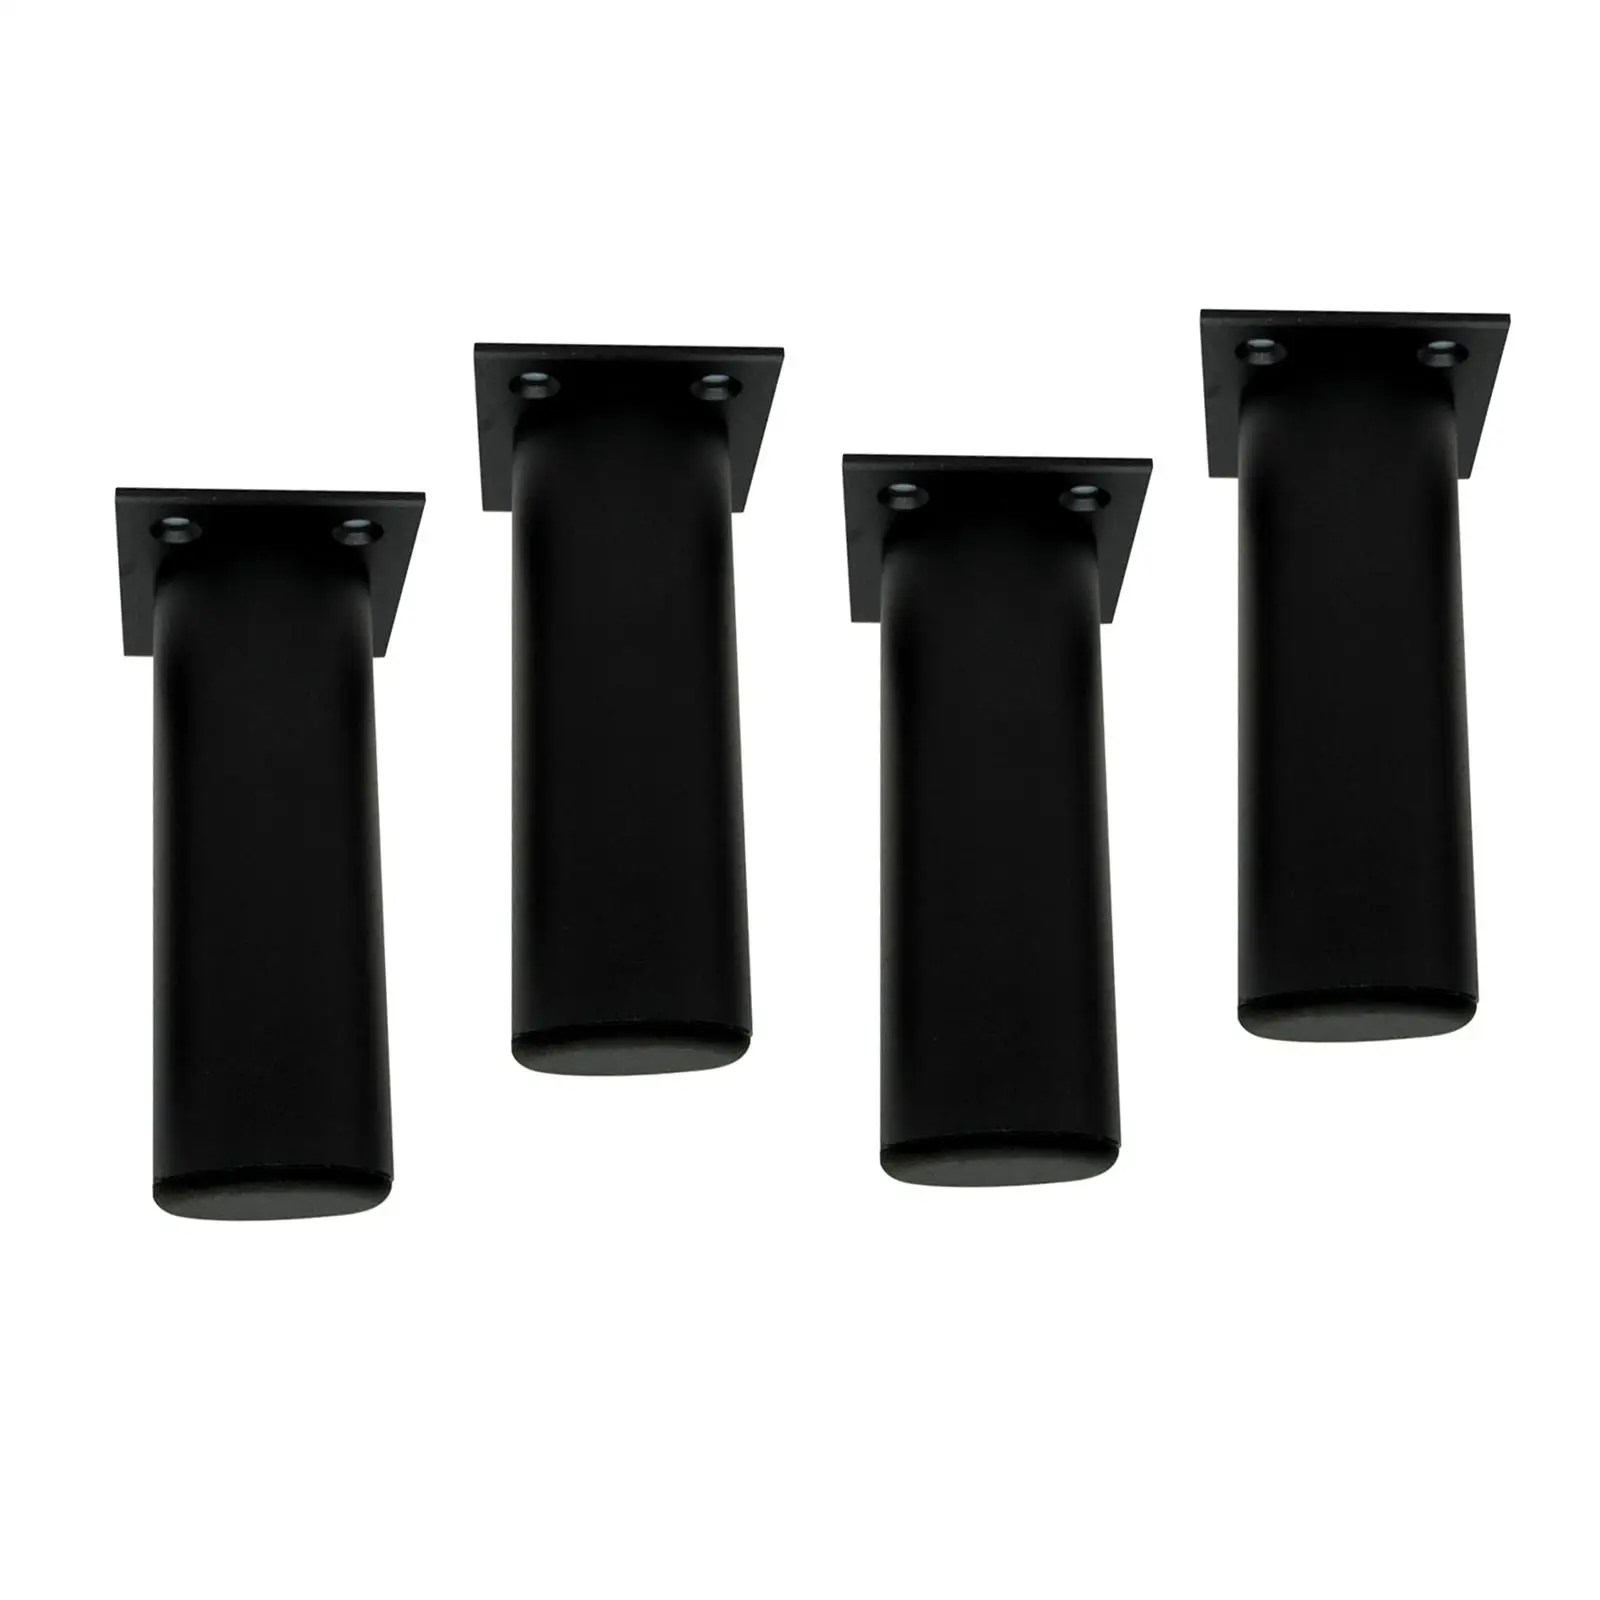 4Pcs Furniture Leg Replacement Adjustable Multifunction Bed Leg Support Feet for TV Stand Furniture Bed Coffee Table Cabinet